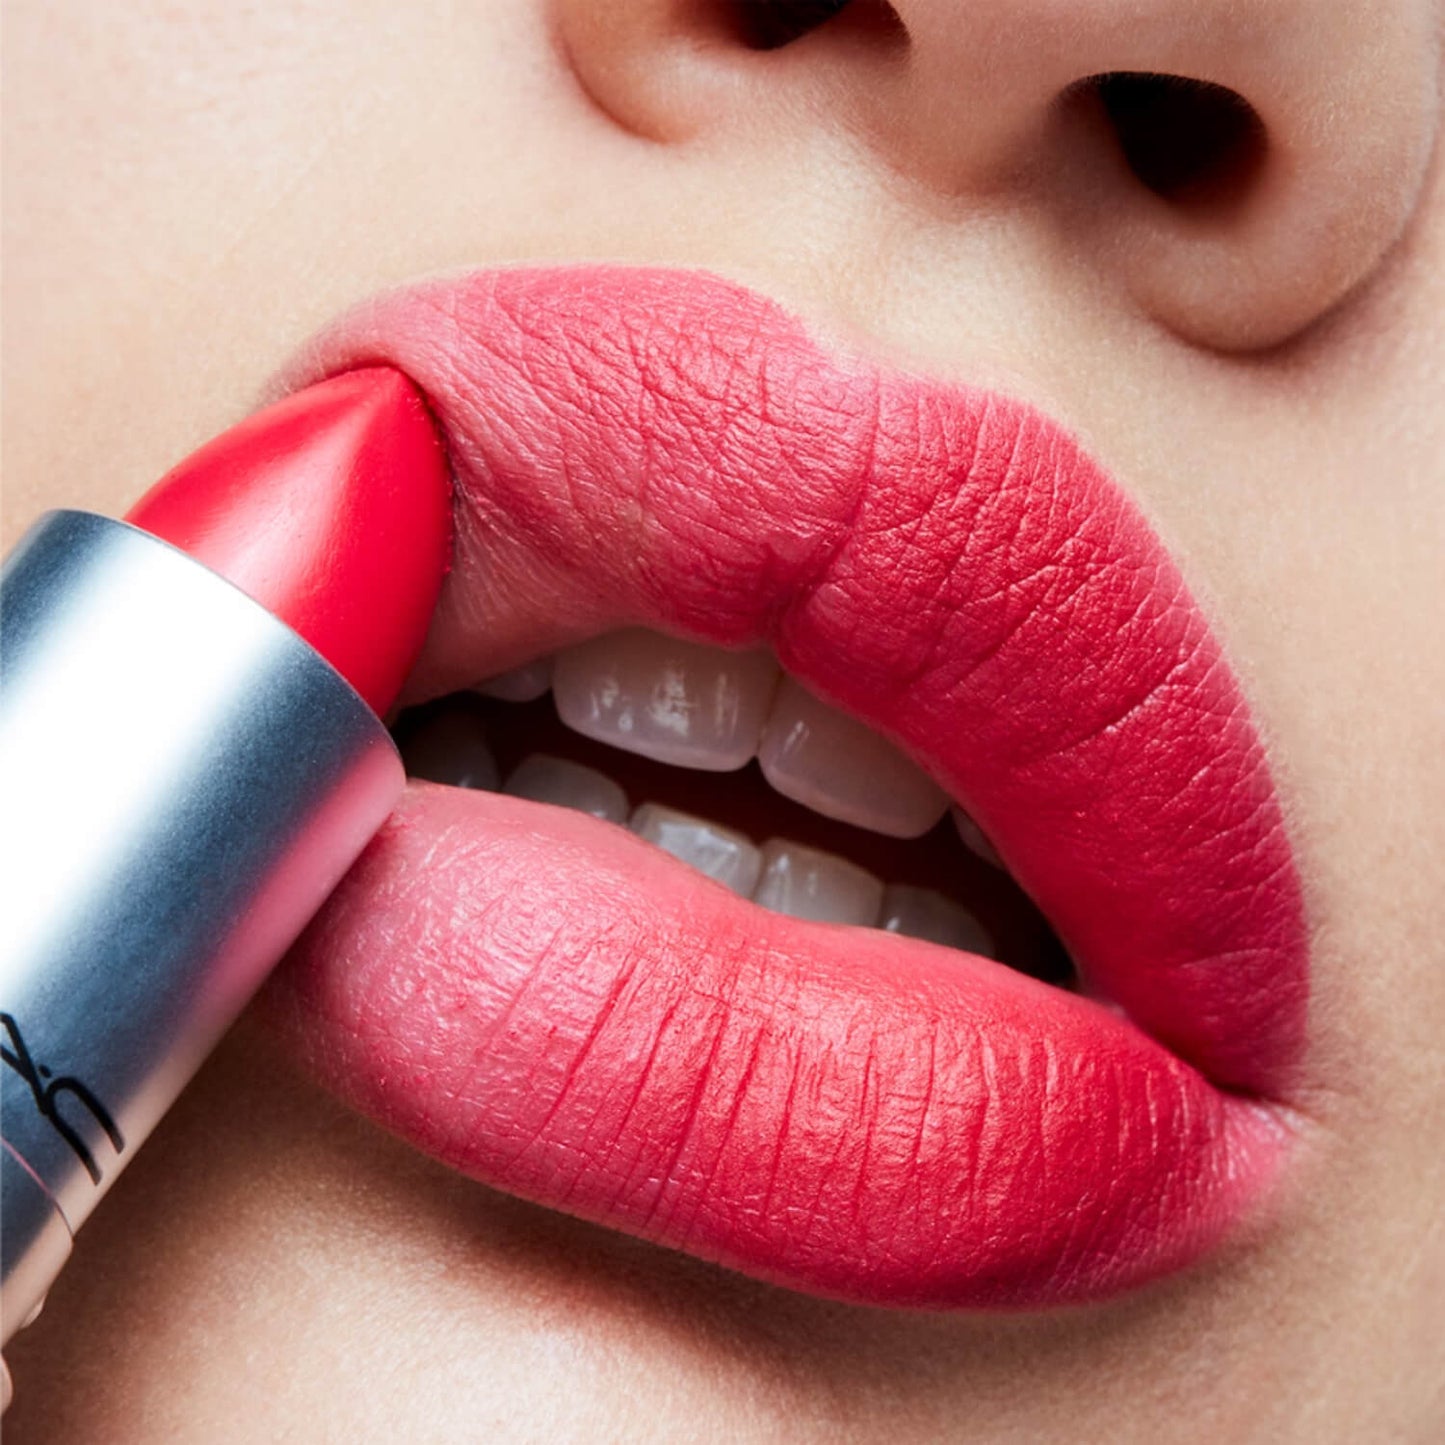 swatch of mac lipstick relentlessly red available at heygirl.pk for delivery in karachi lahore islamabad pakistan